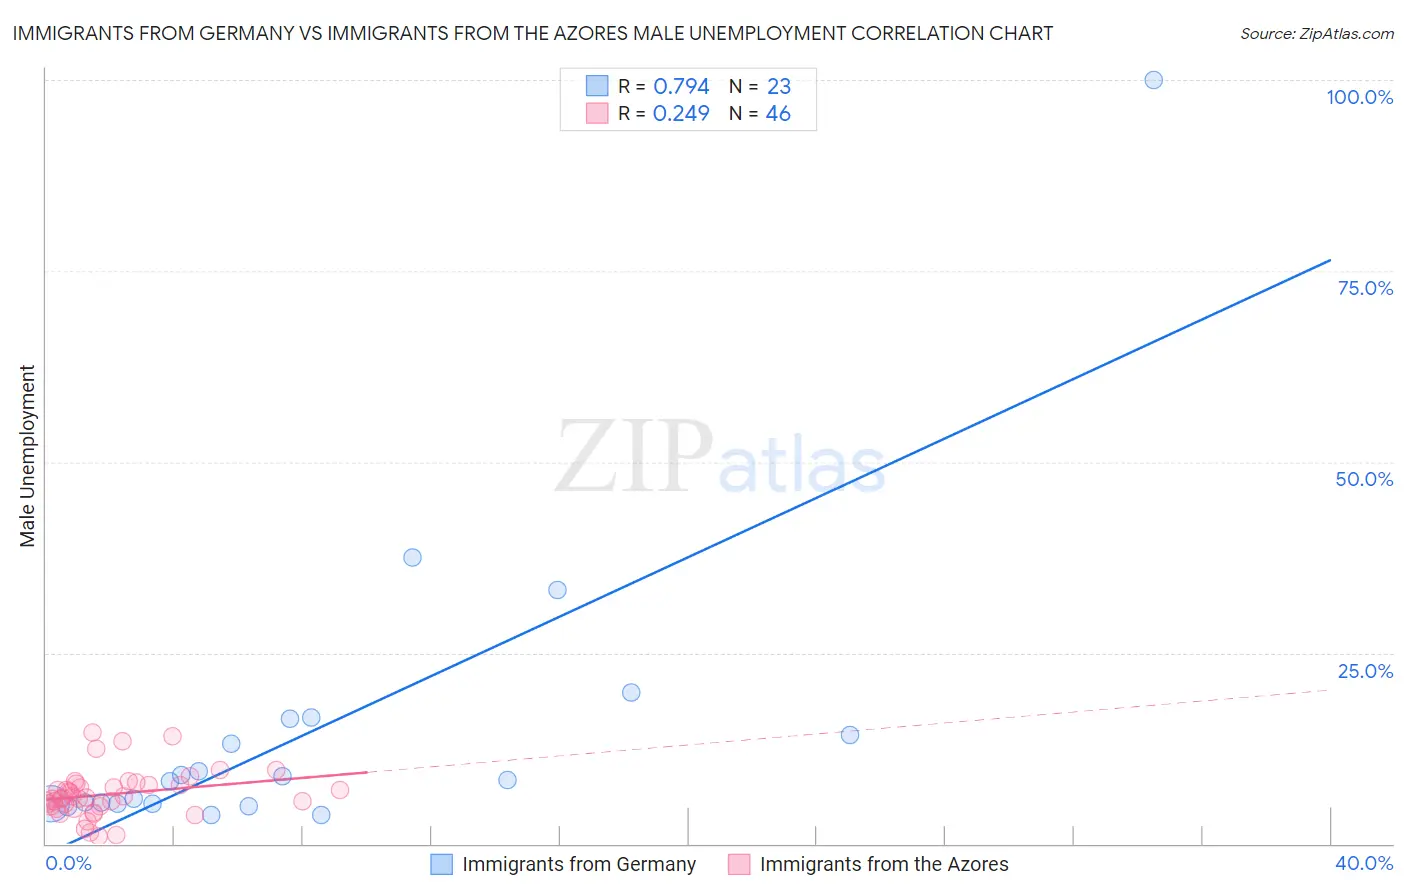 Immigrants from Germany vs Immigrants from the Azores Male Unemployment